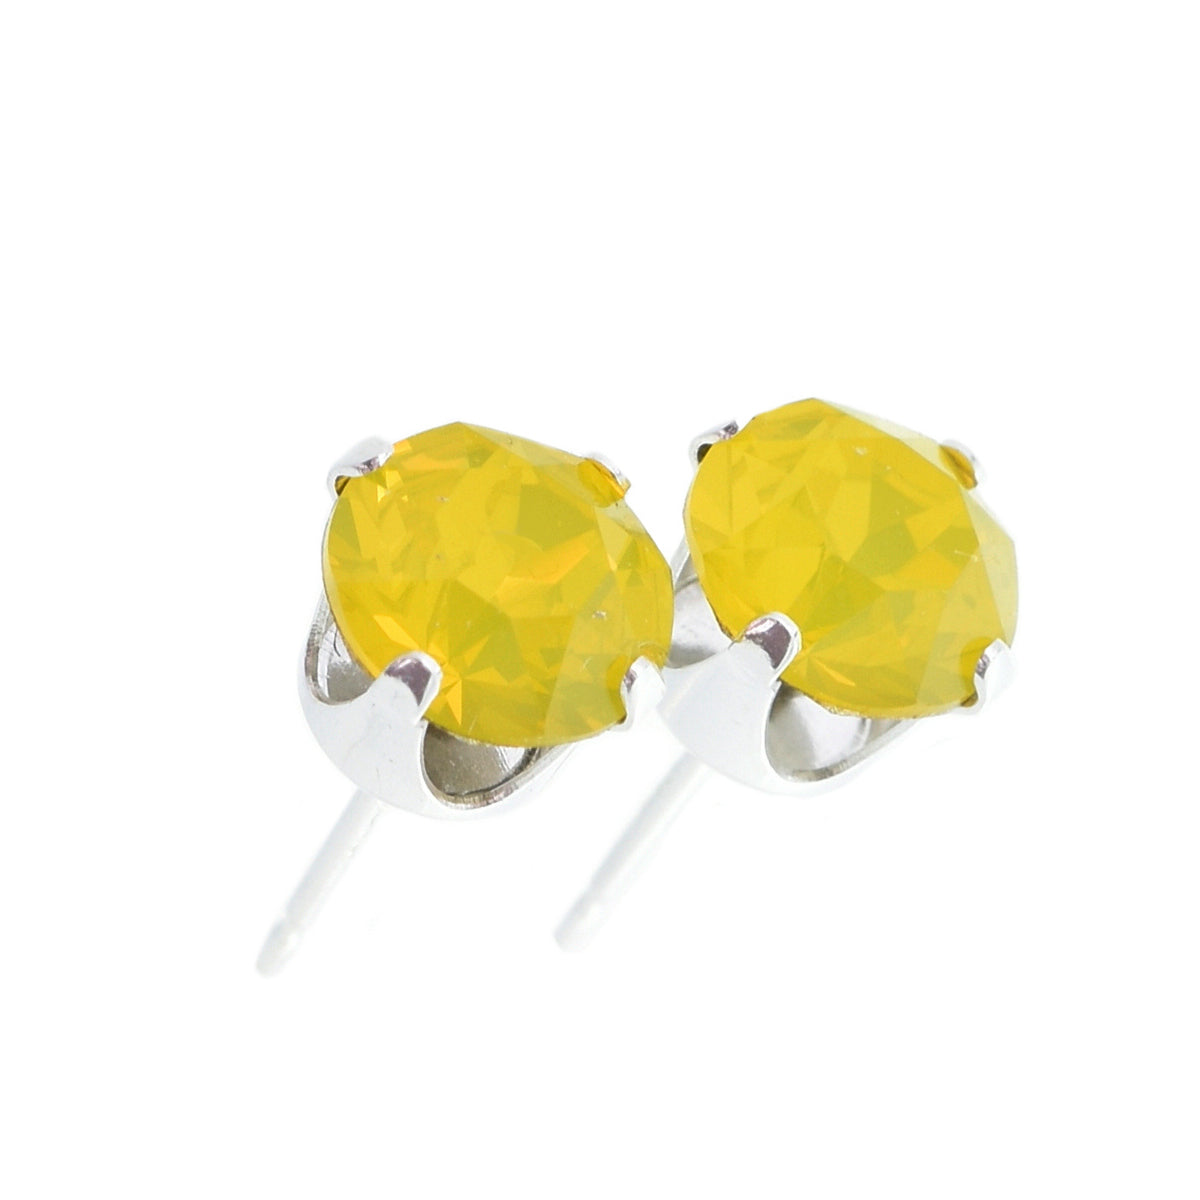 pewterhooter® Women's Classic Collection 925 Sterling silver earrings with sparkling Yellow Opal crystals, packaged in a gift box for any occasion.